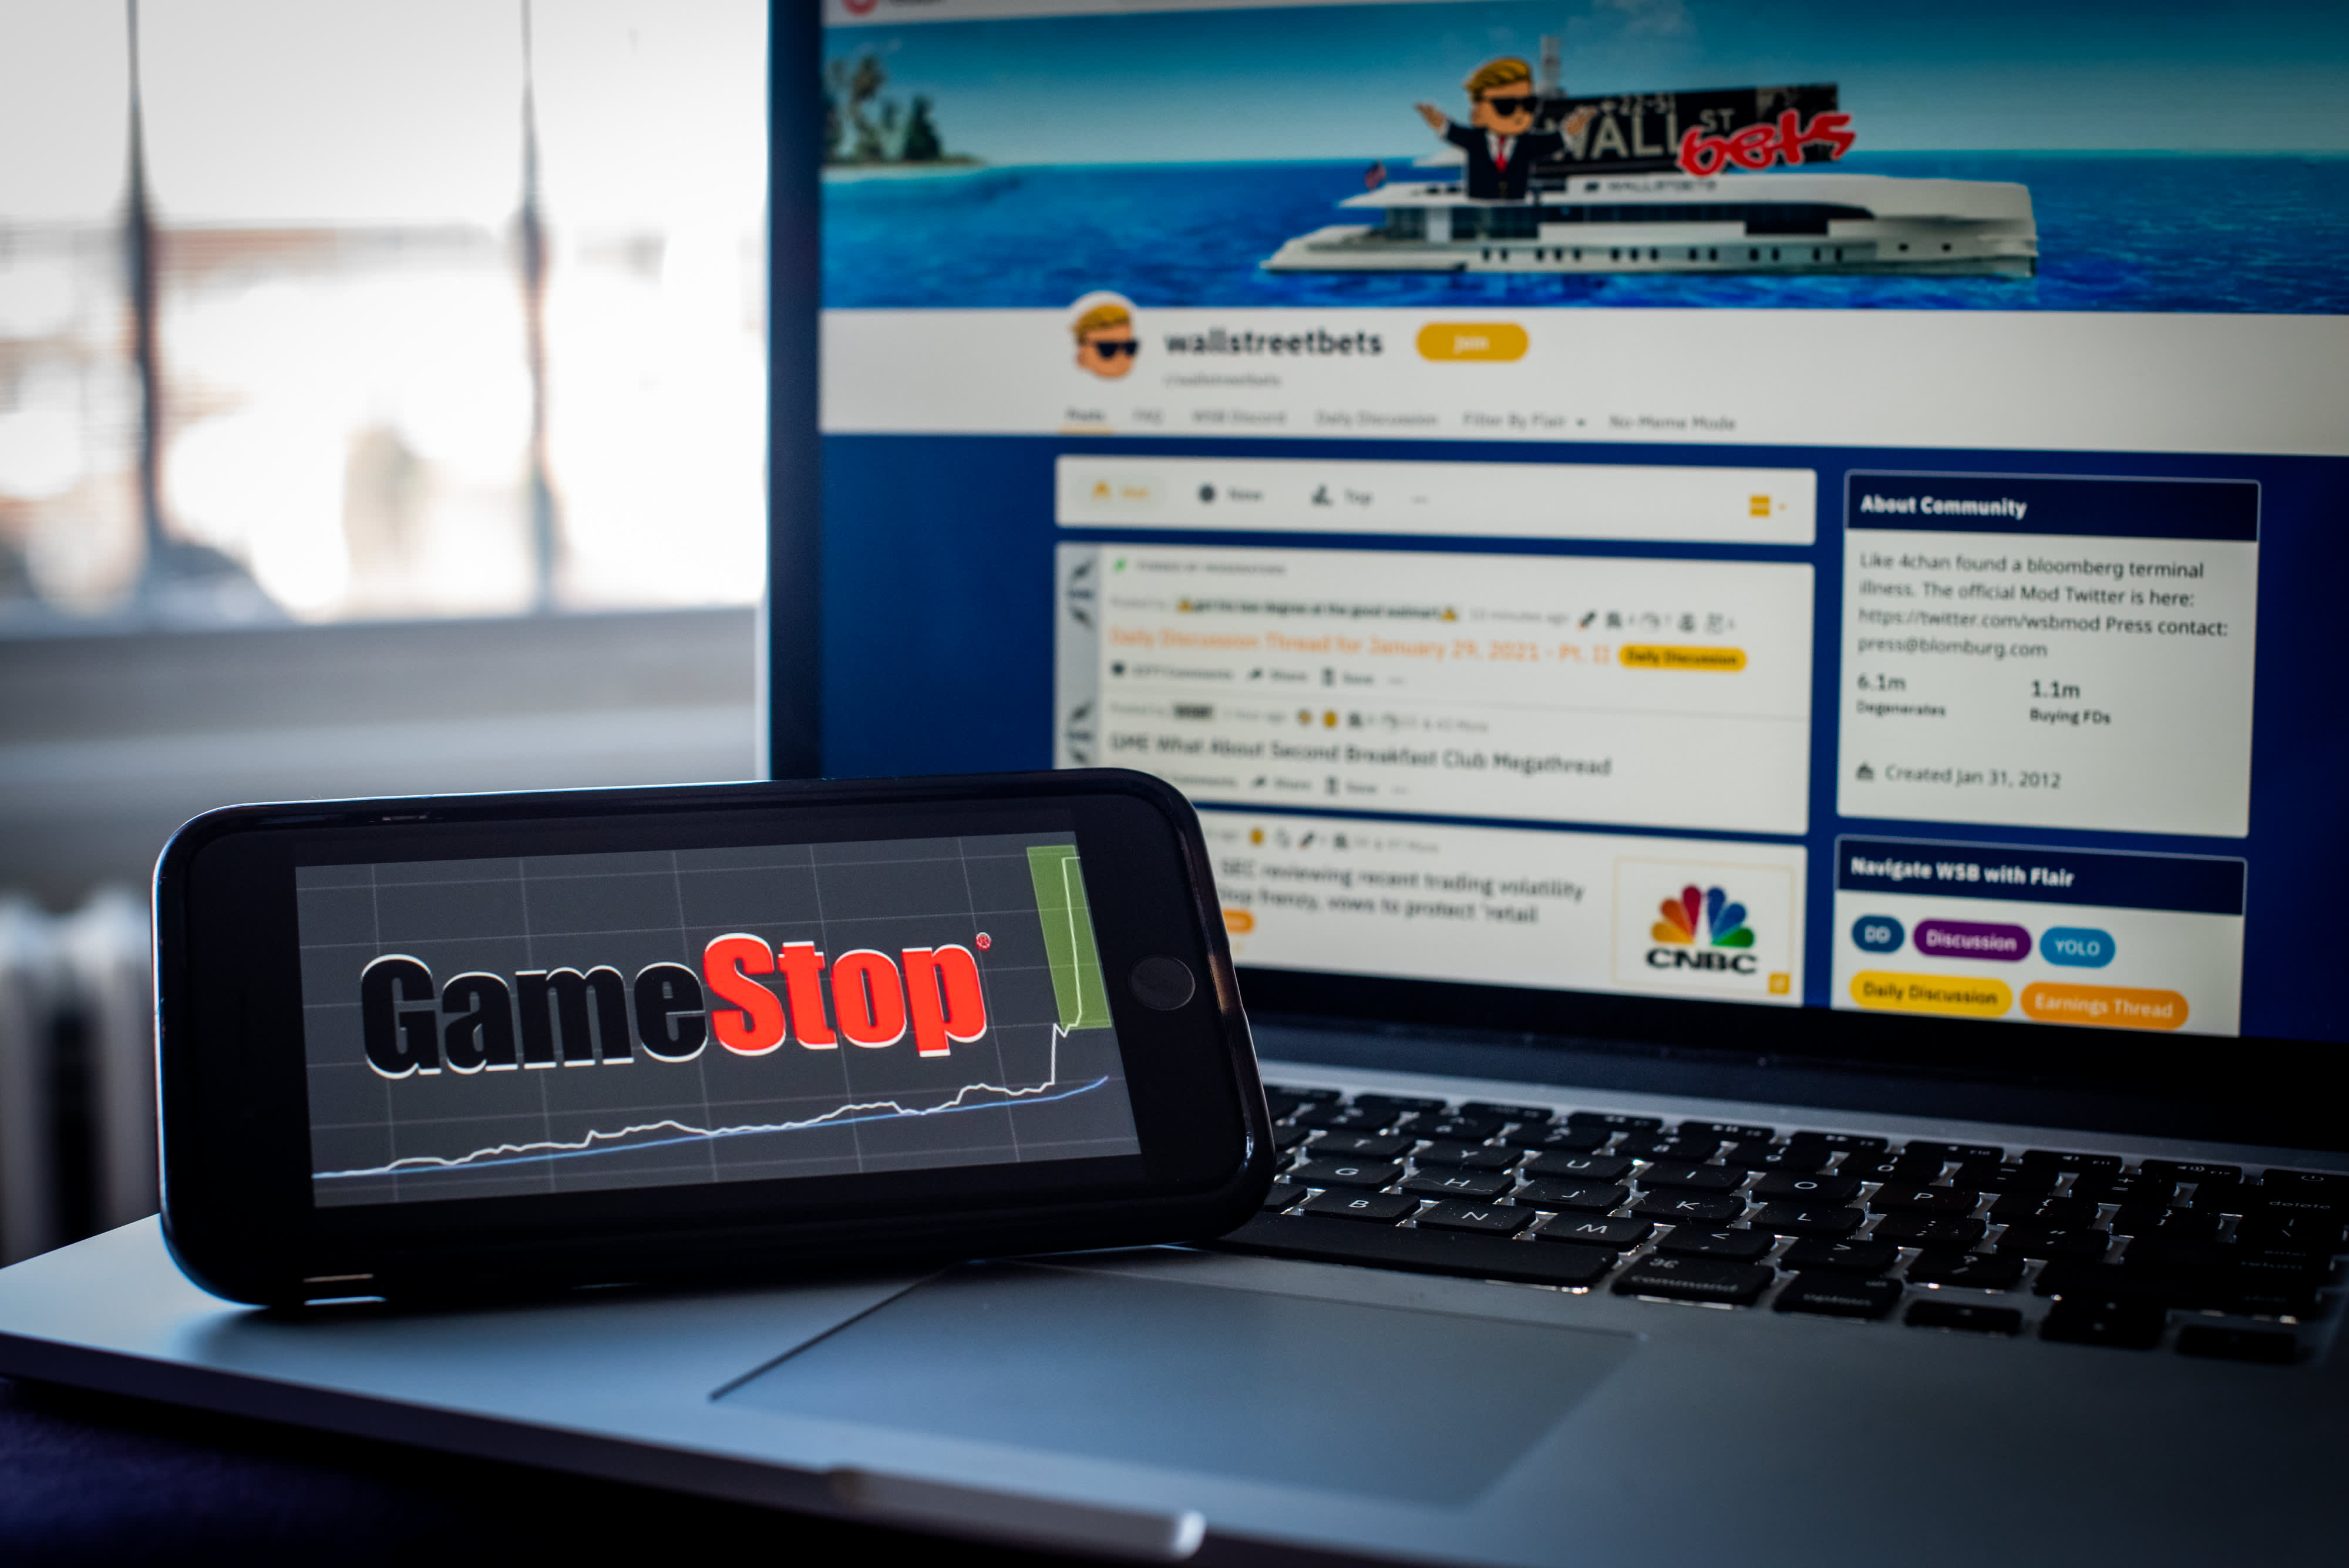 GameStop shares are up 18% in the pre-market as the frenzy continues in February